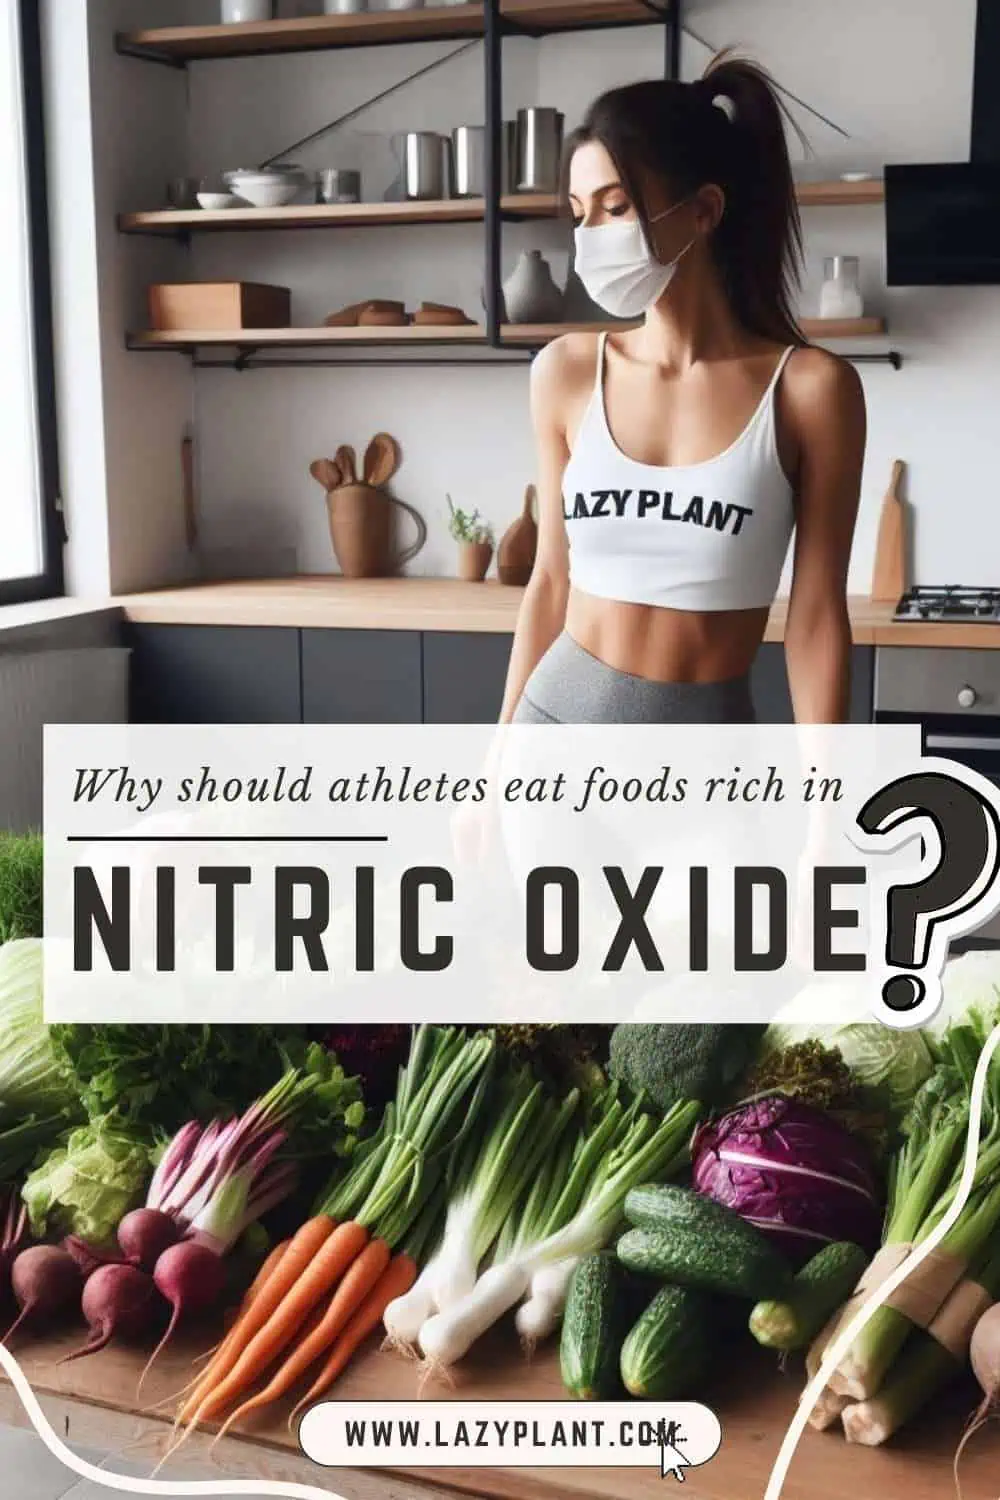 Why should athletes eat foods rich in nitric oxide?